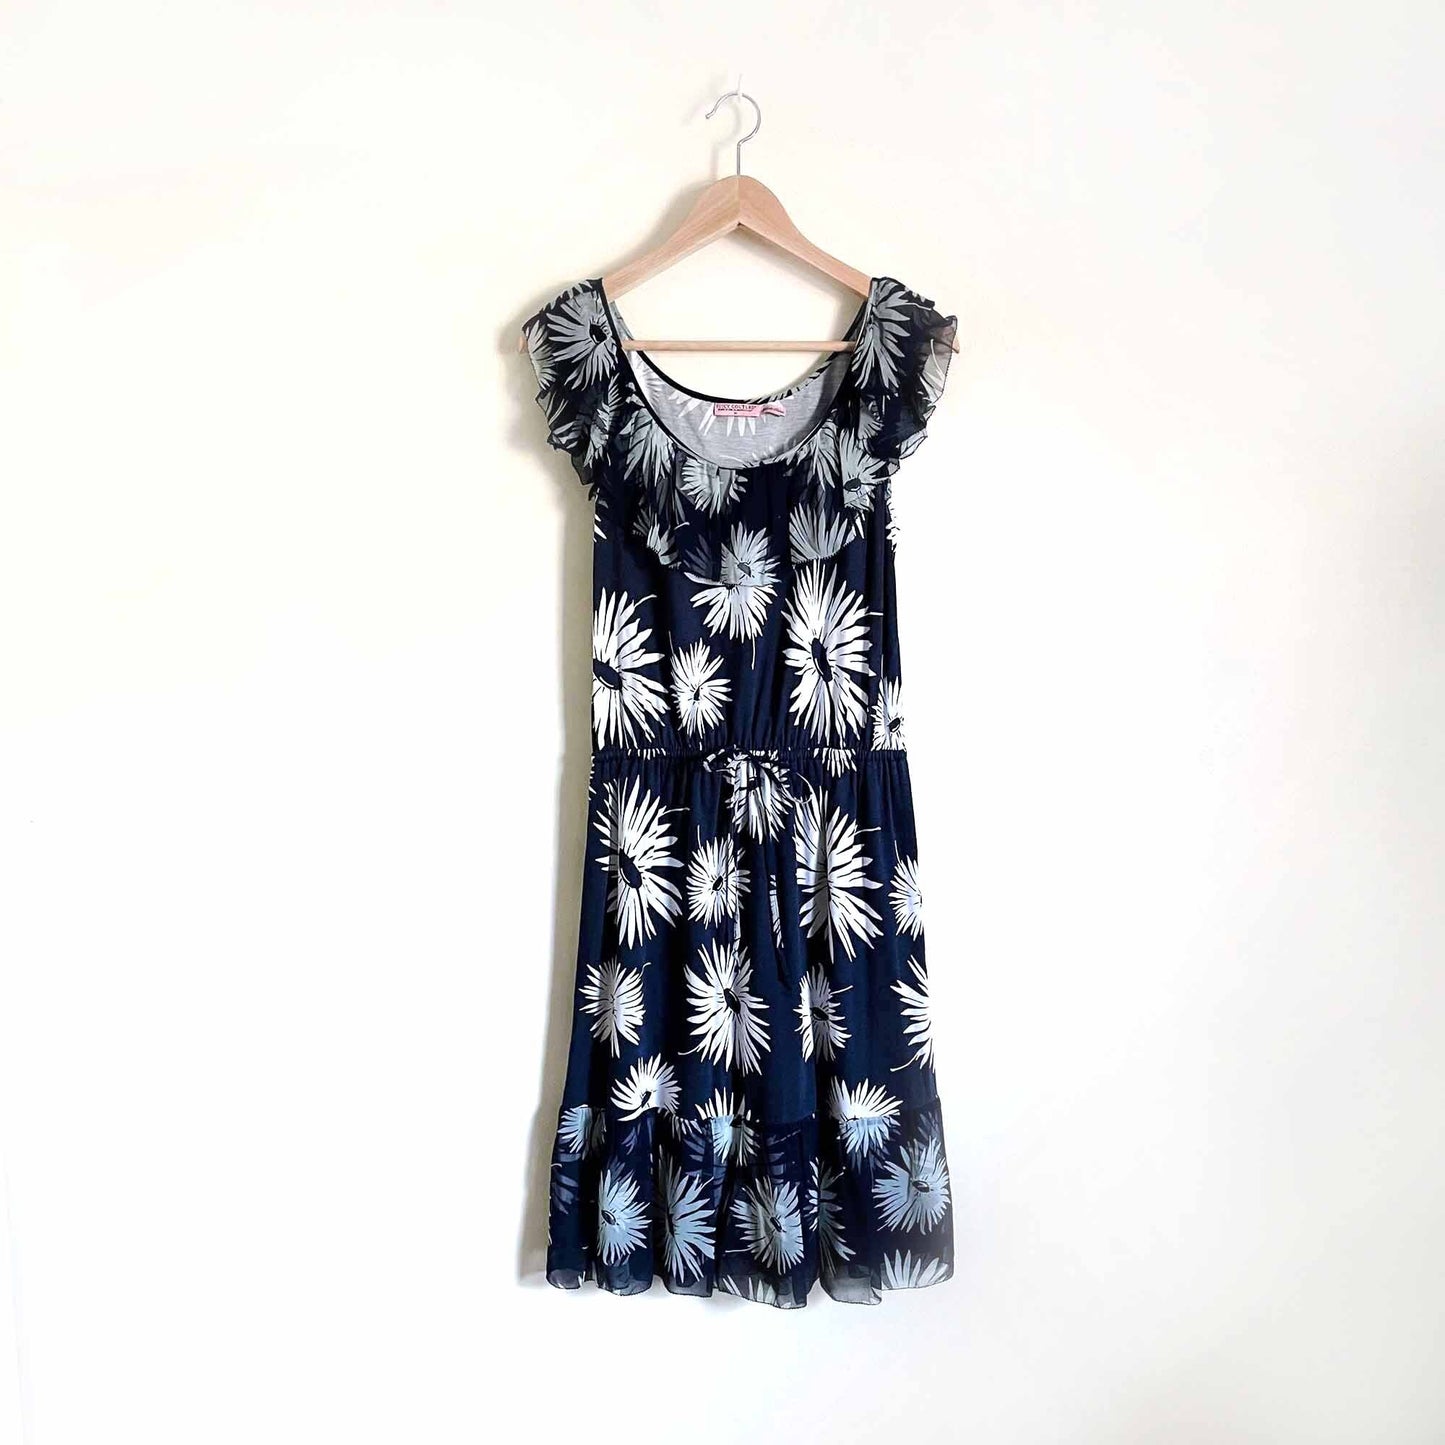 juicy couture floral dress with silk chiffon ruffle trim - size 6